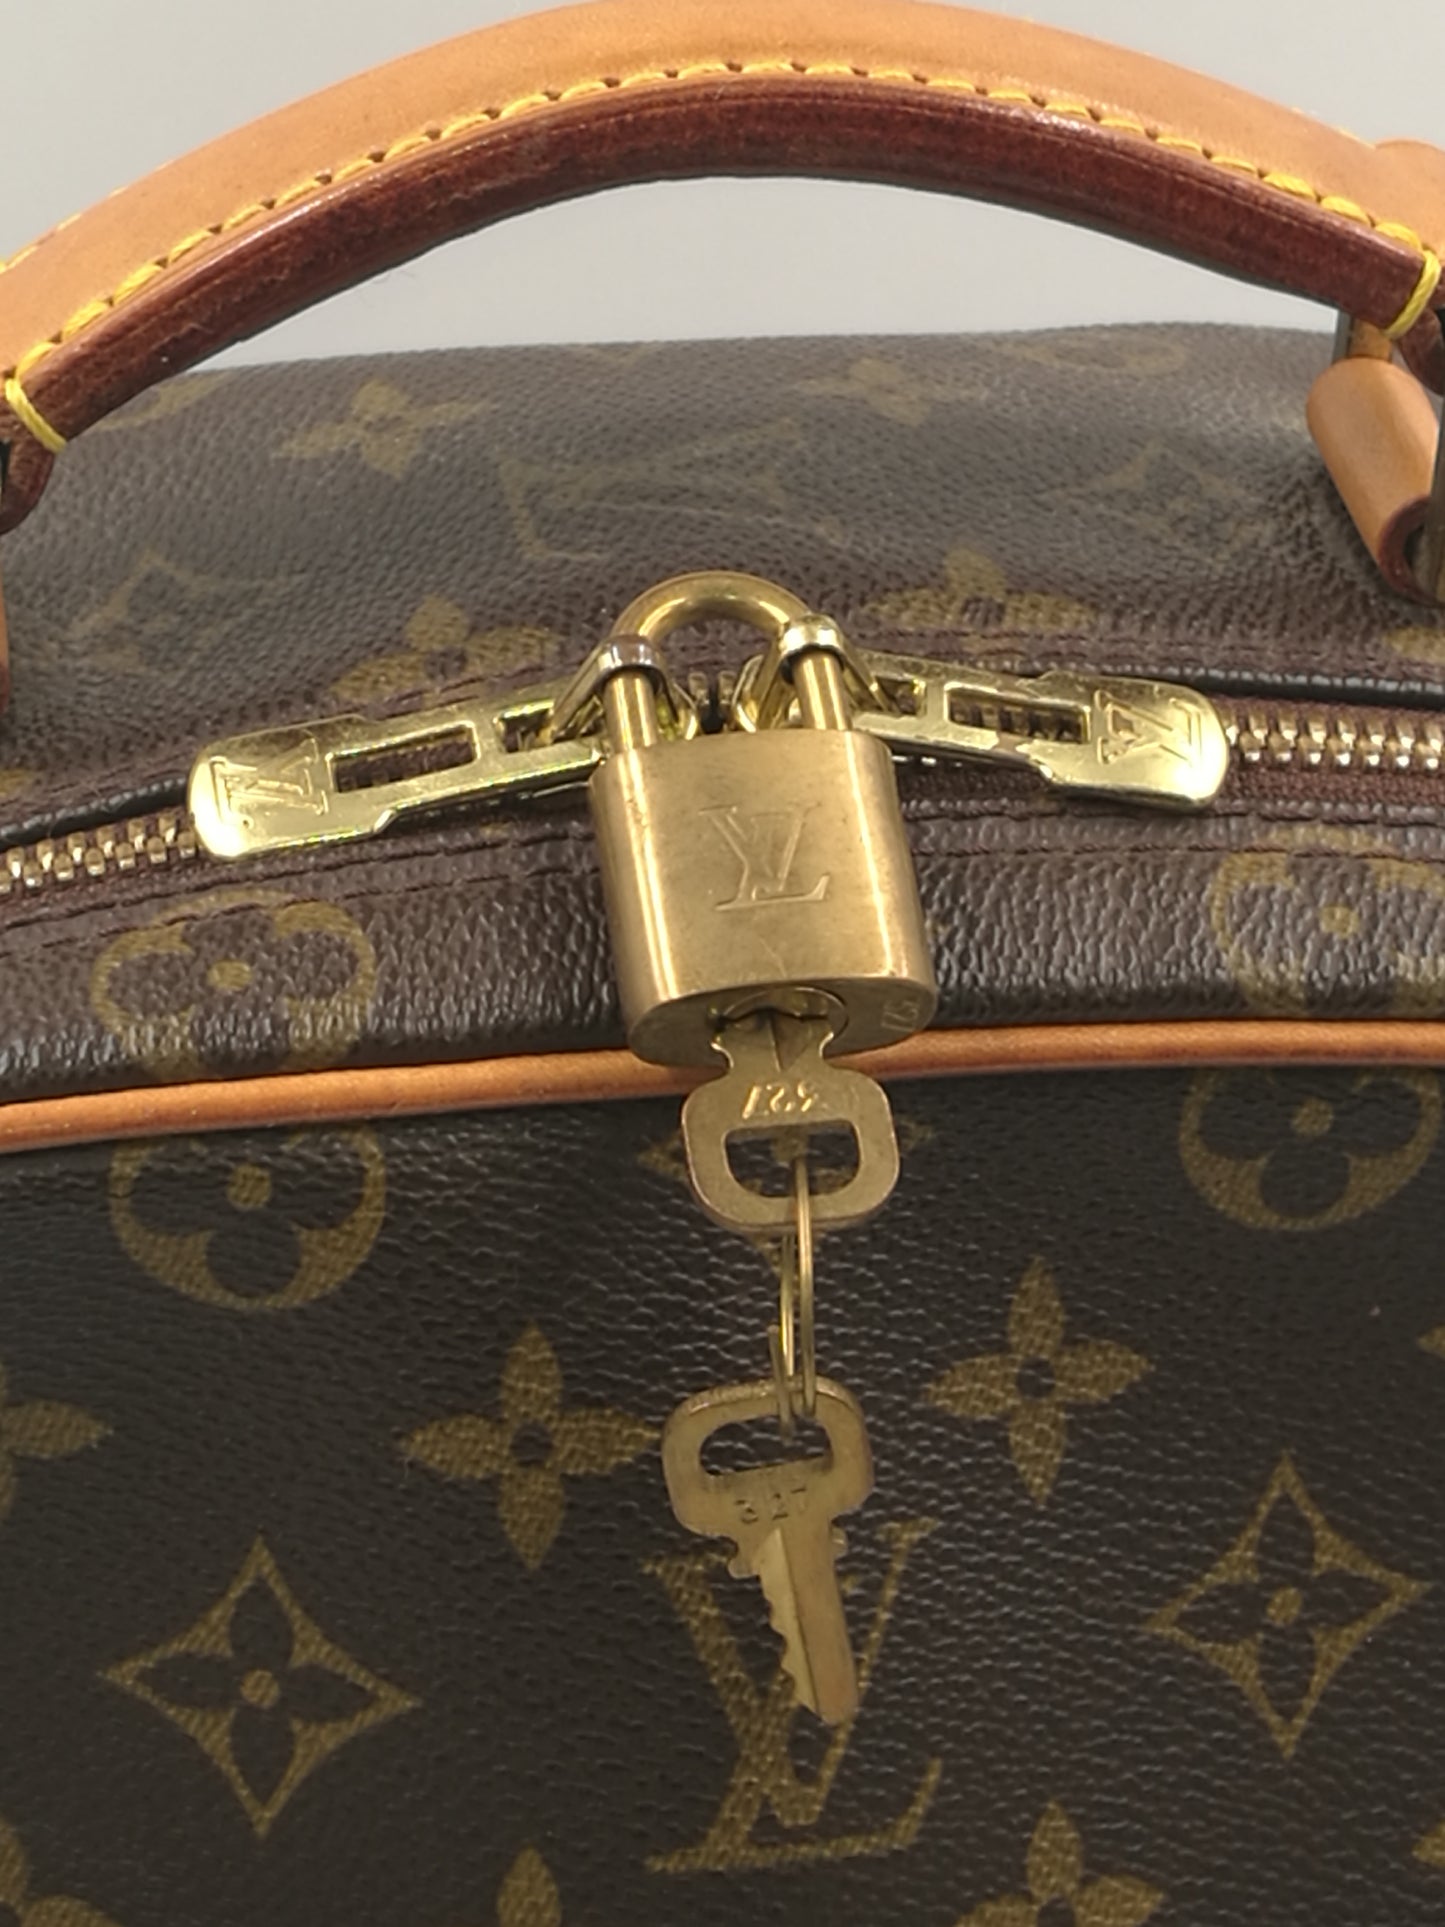 Louis Vuitton Carry all backpack one shoulder